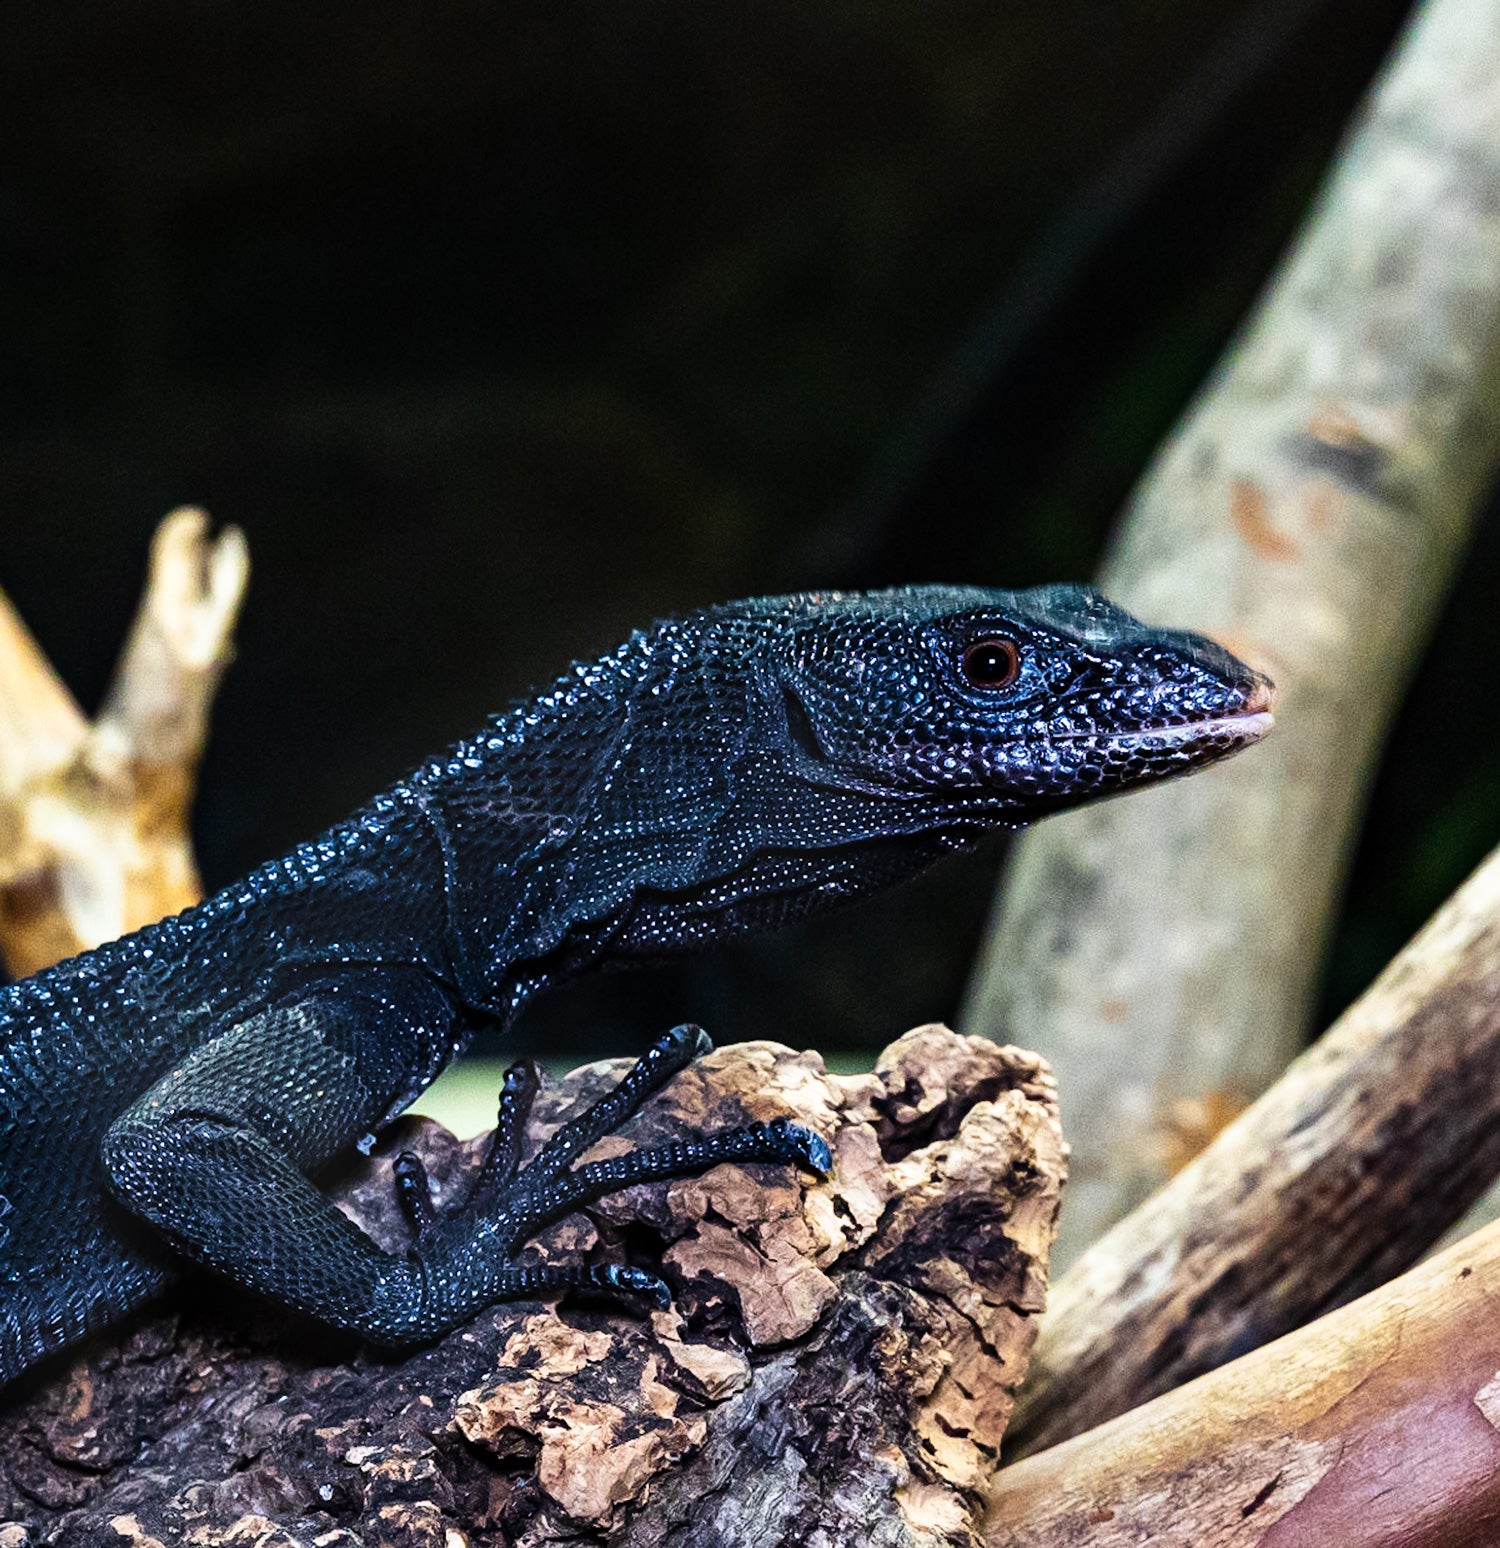 A black tree monitor (lizard) with dark coloration, an elongated body and long toes with sharp claws